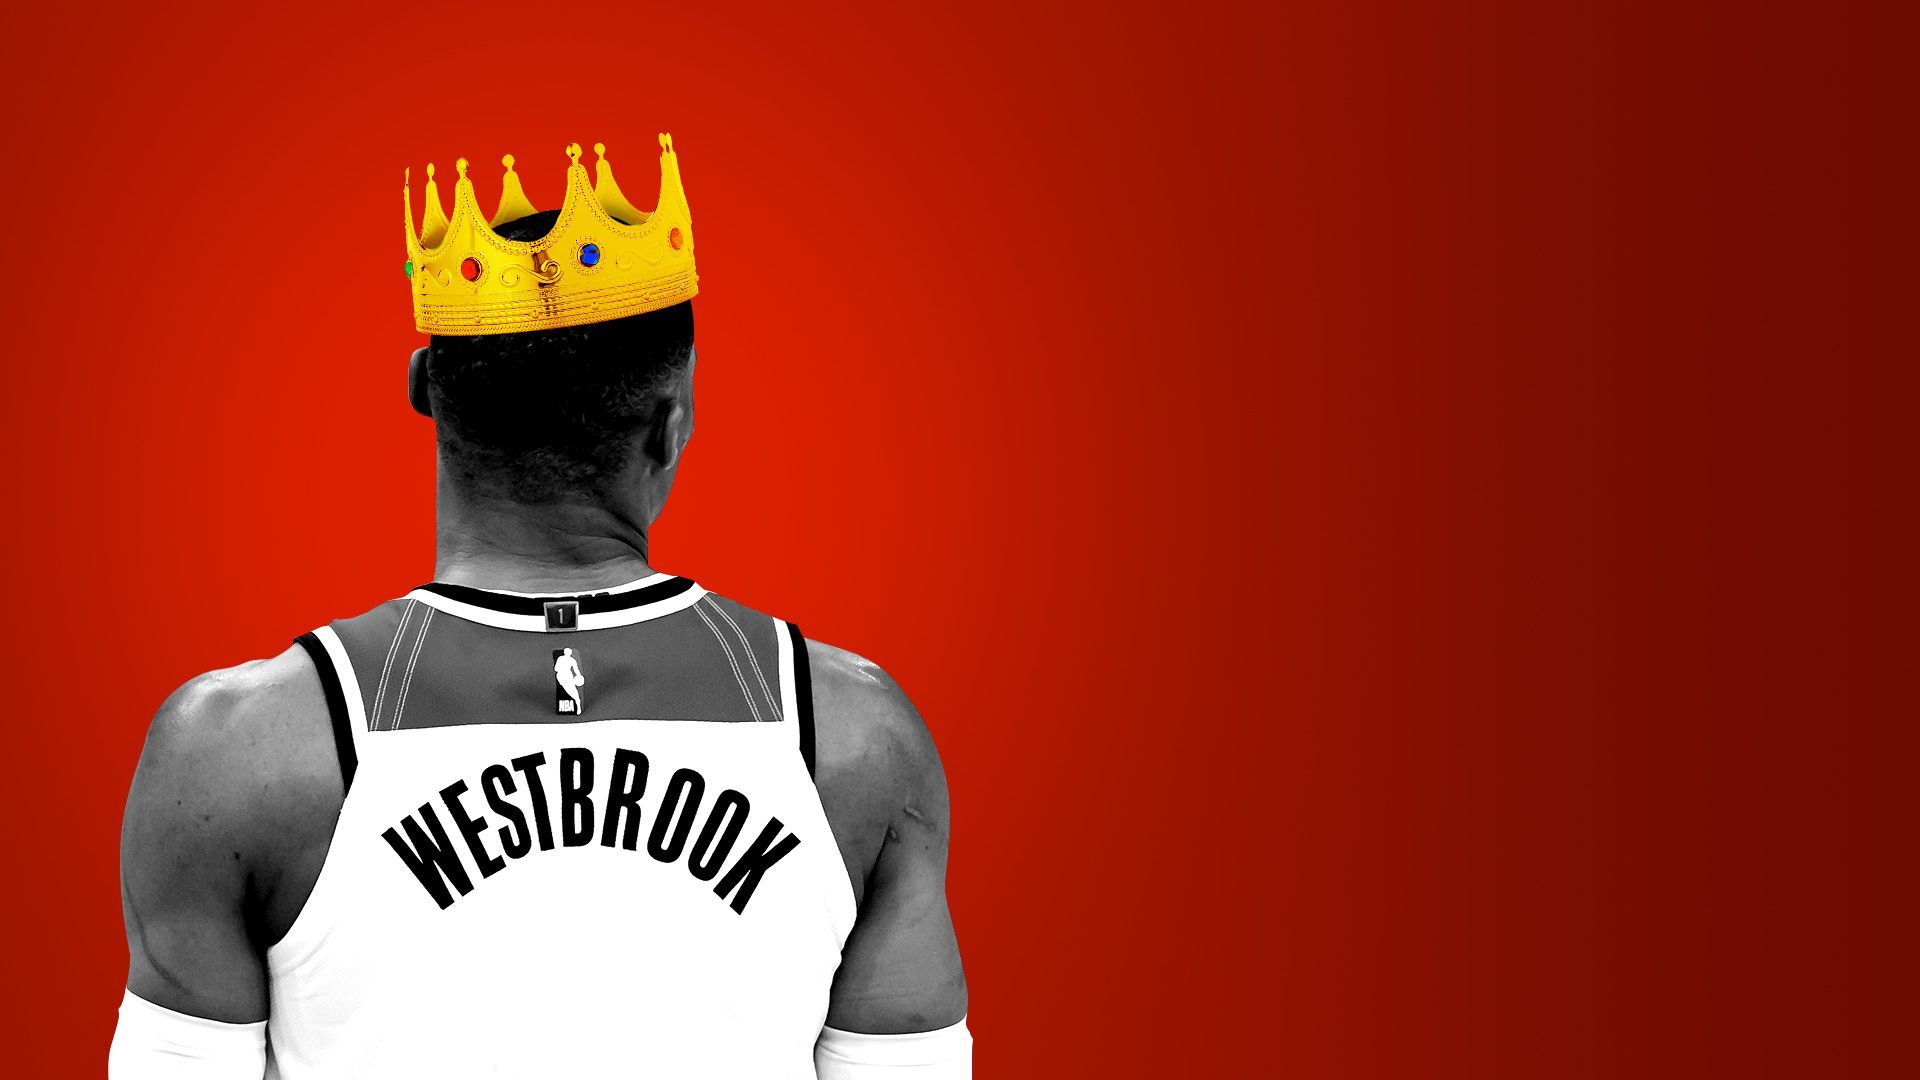 Photo illustration of Russell Westbrook wearing a crown